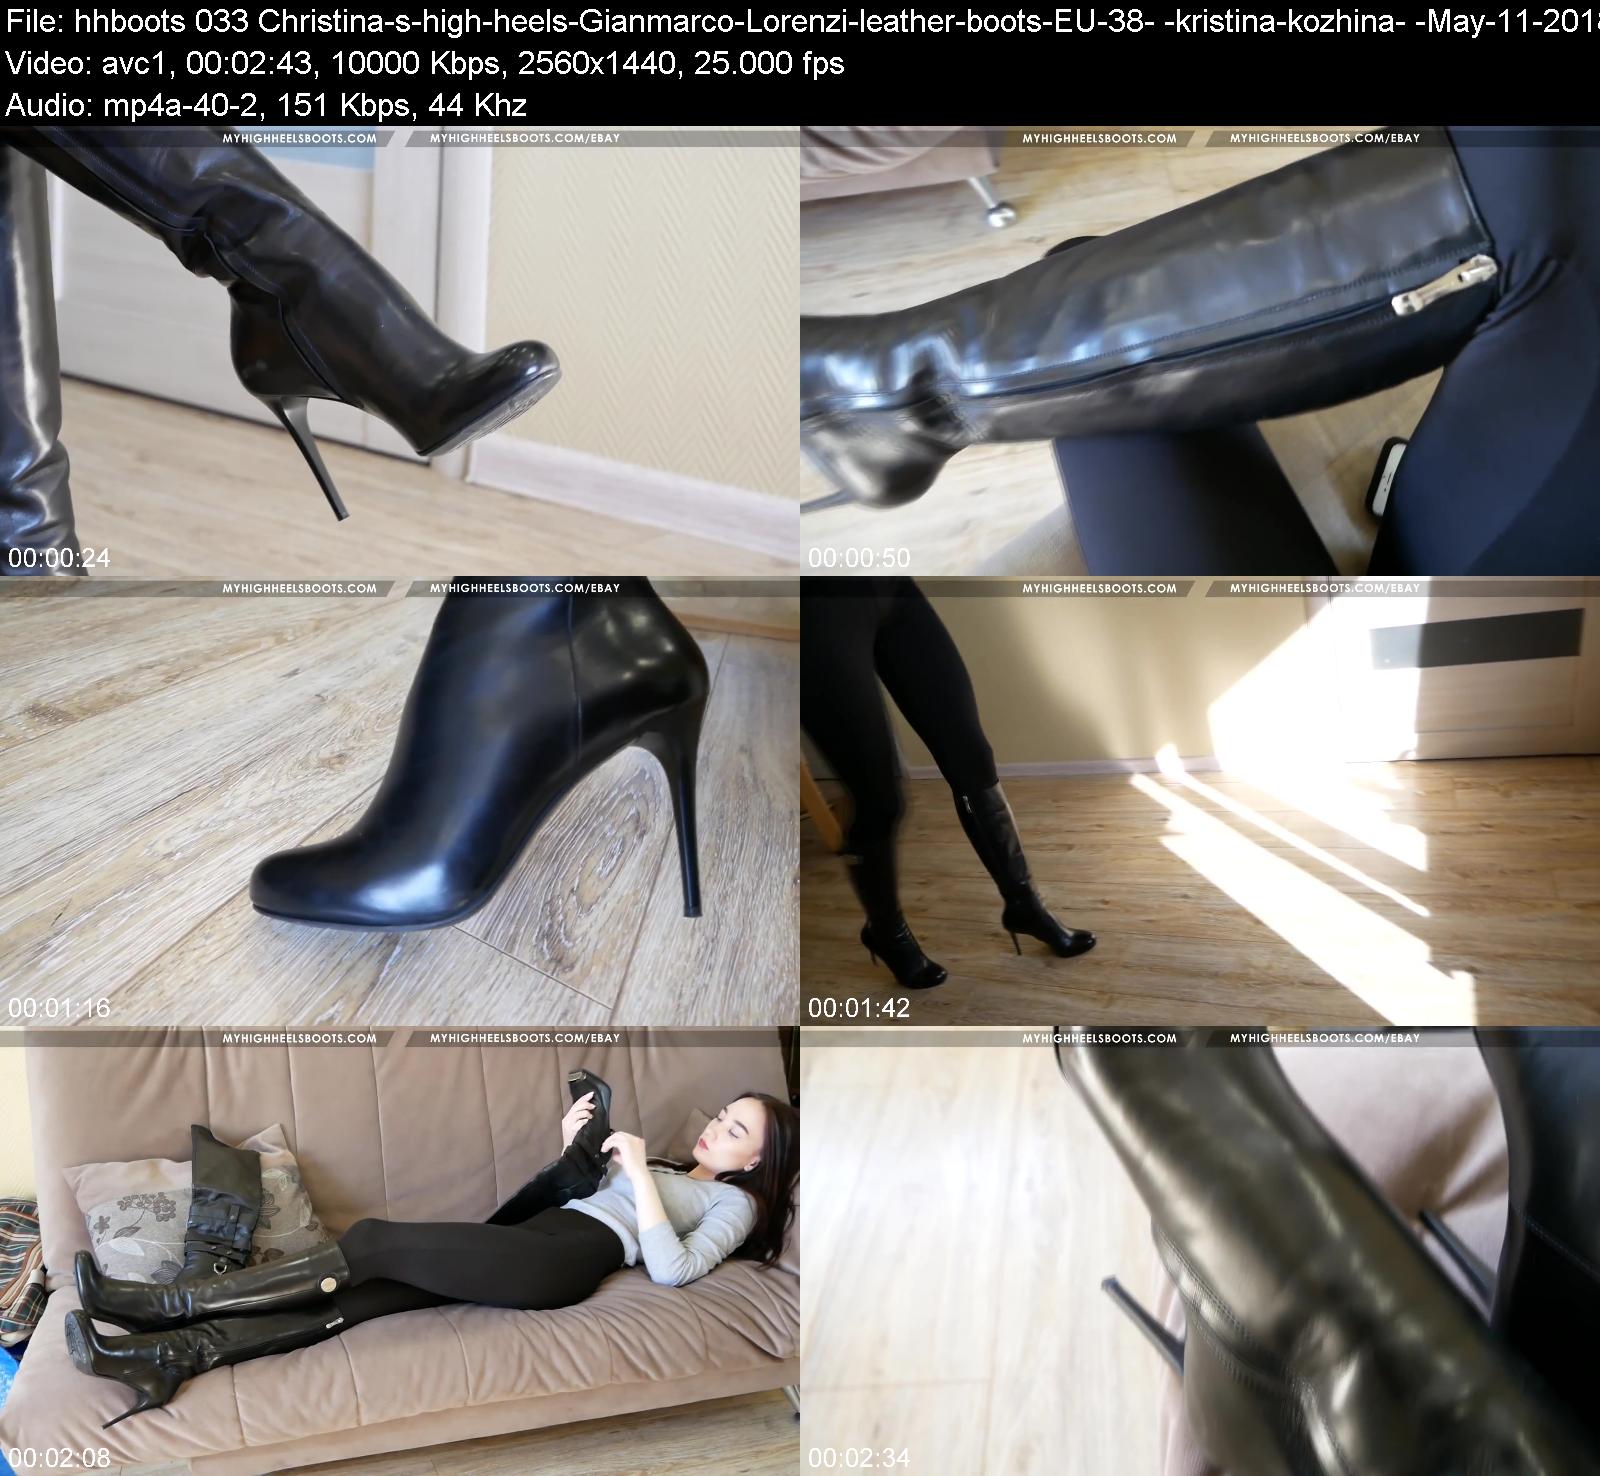 Watch Online OR Download from Keep2Share. hhboots 033 Christina-s-high-heel...